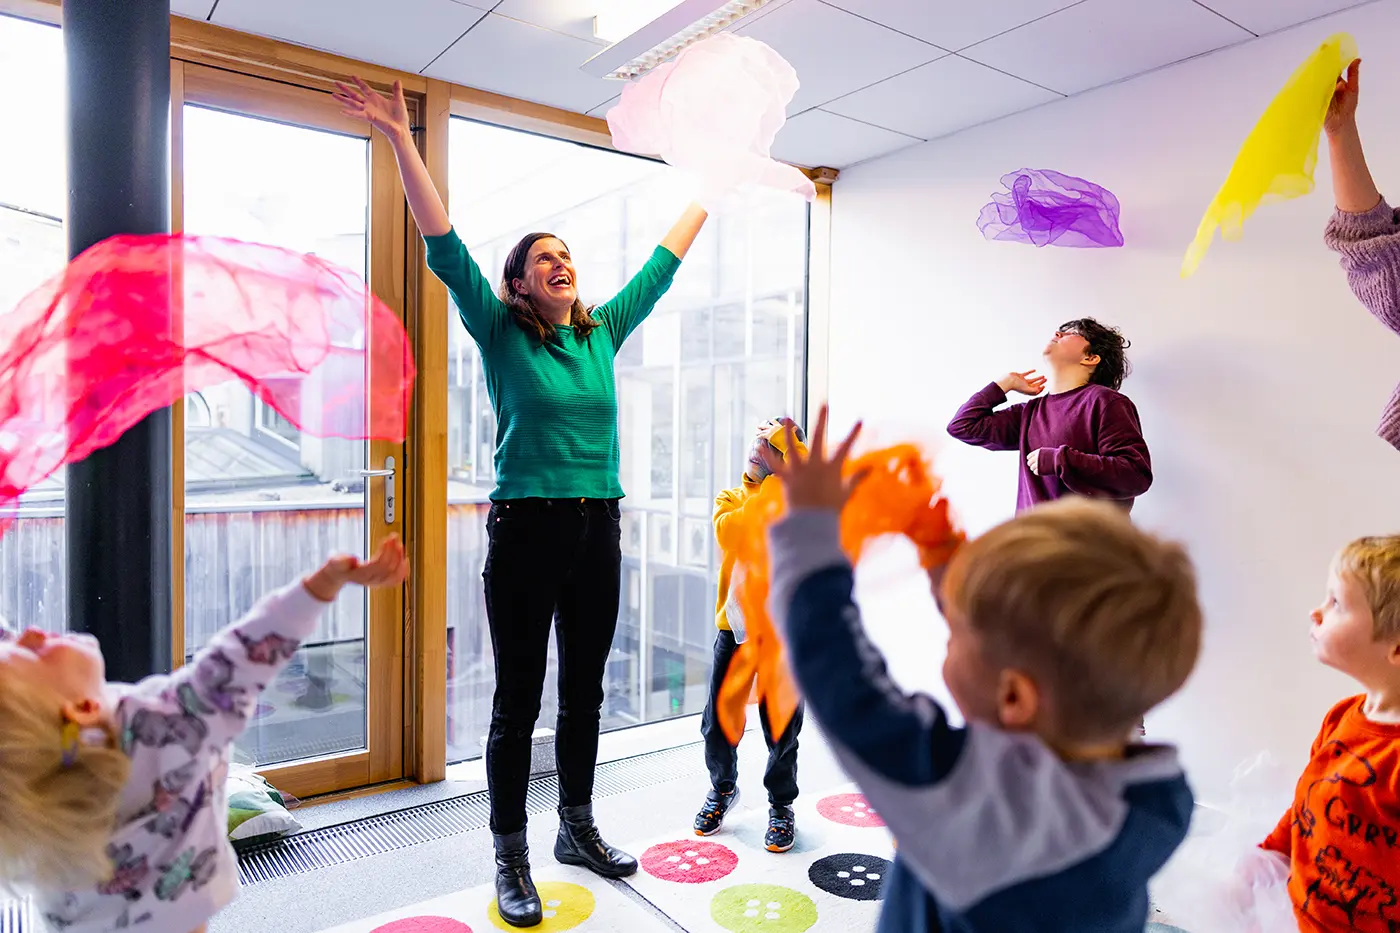 Children's music class, the teacher and the children are throwing colourful scarves in the air, everyone is smiling and laughing.